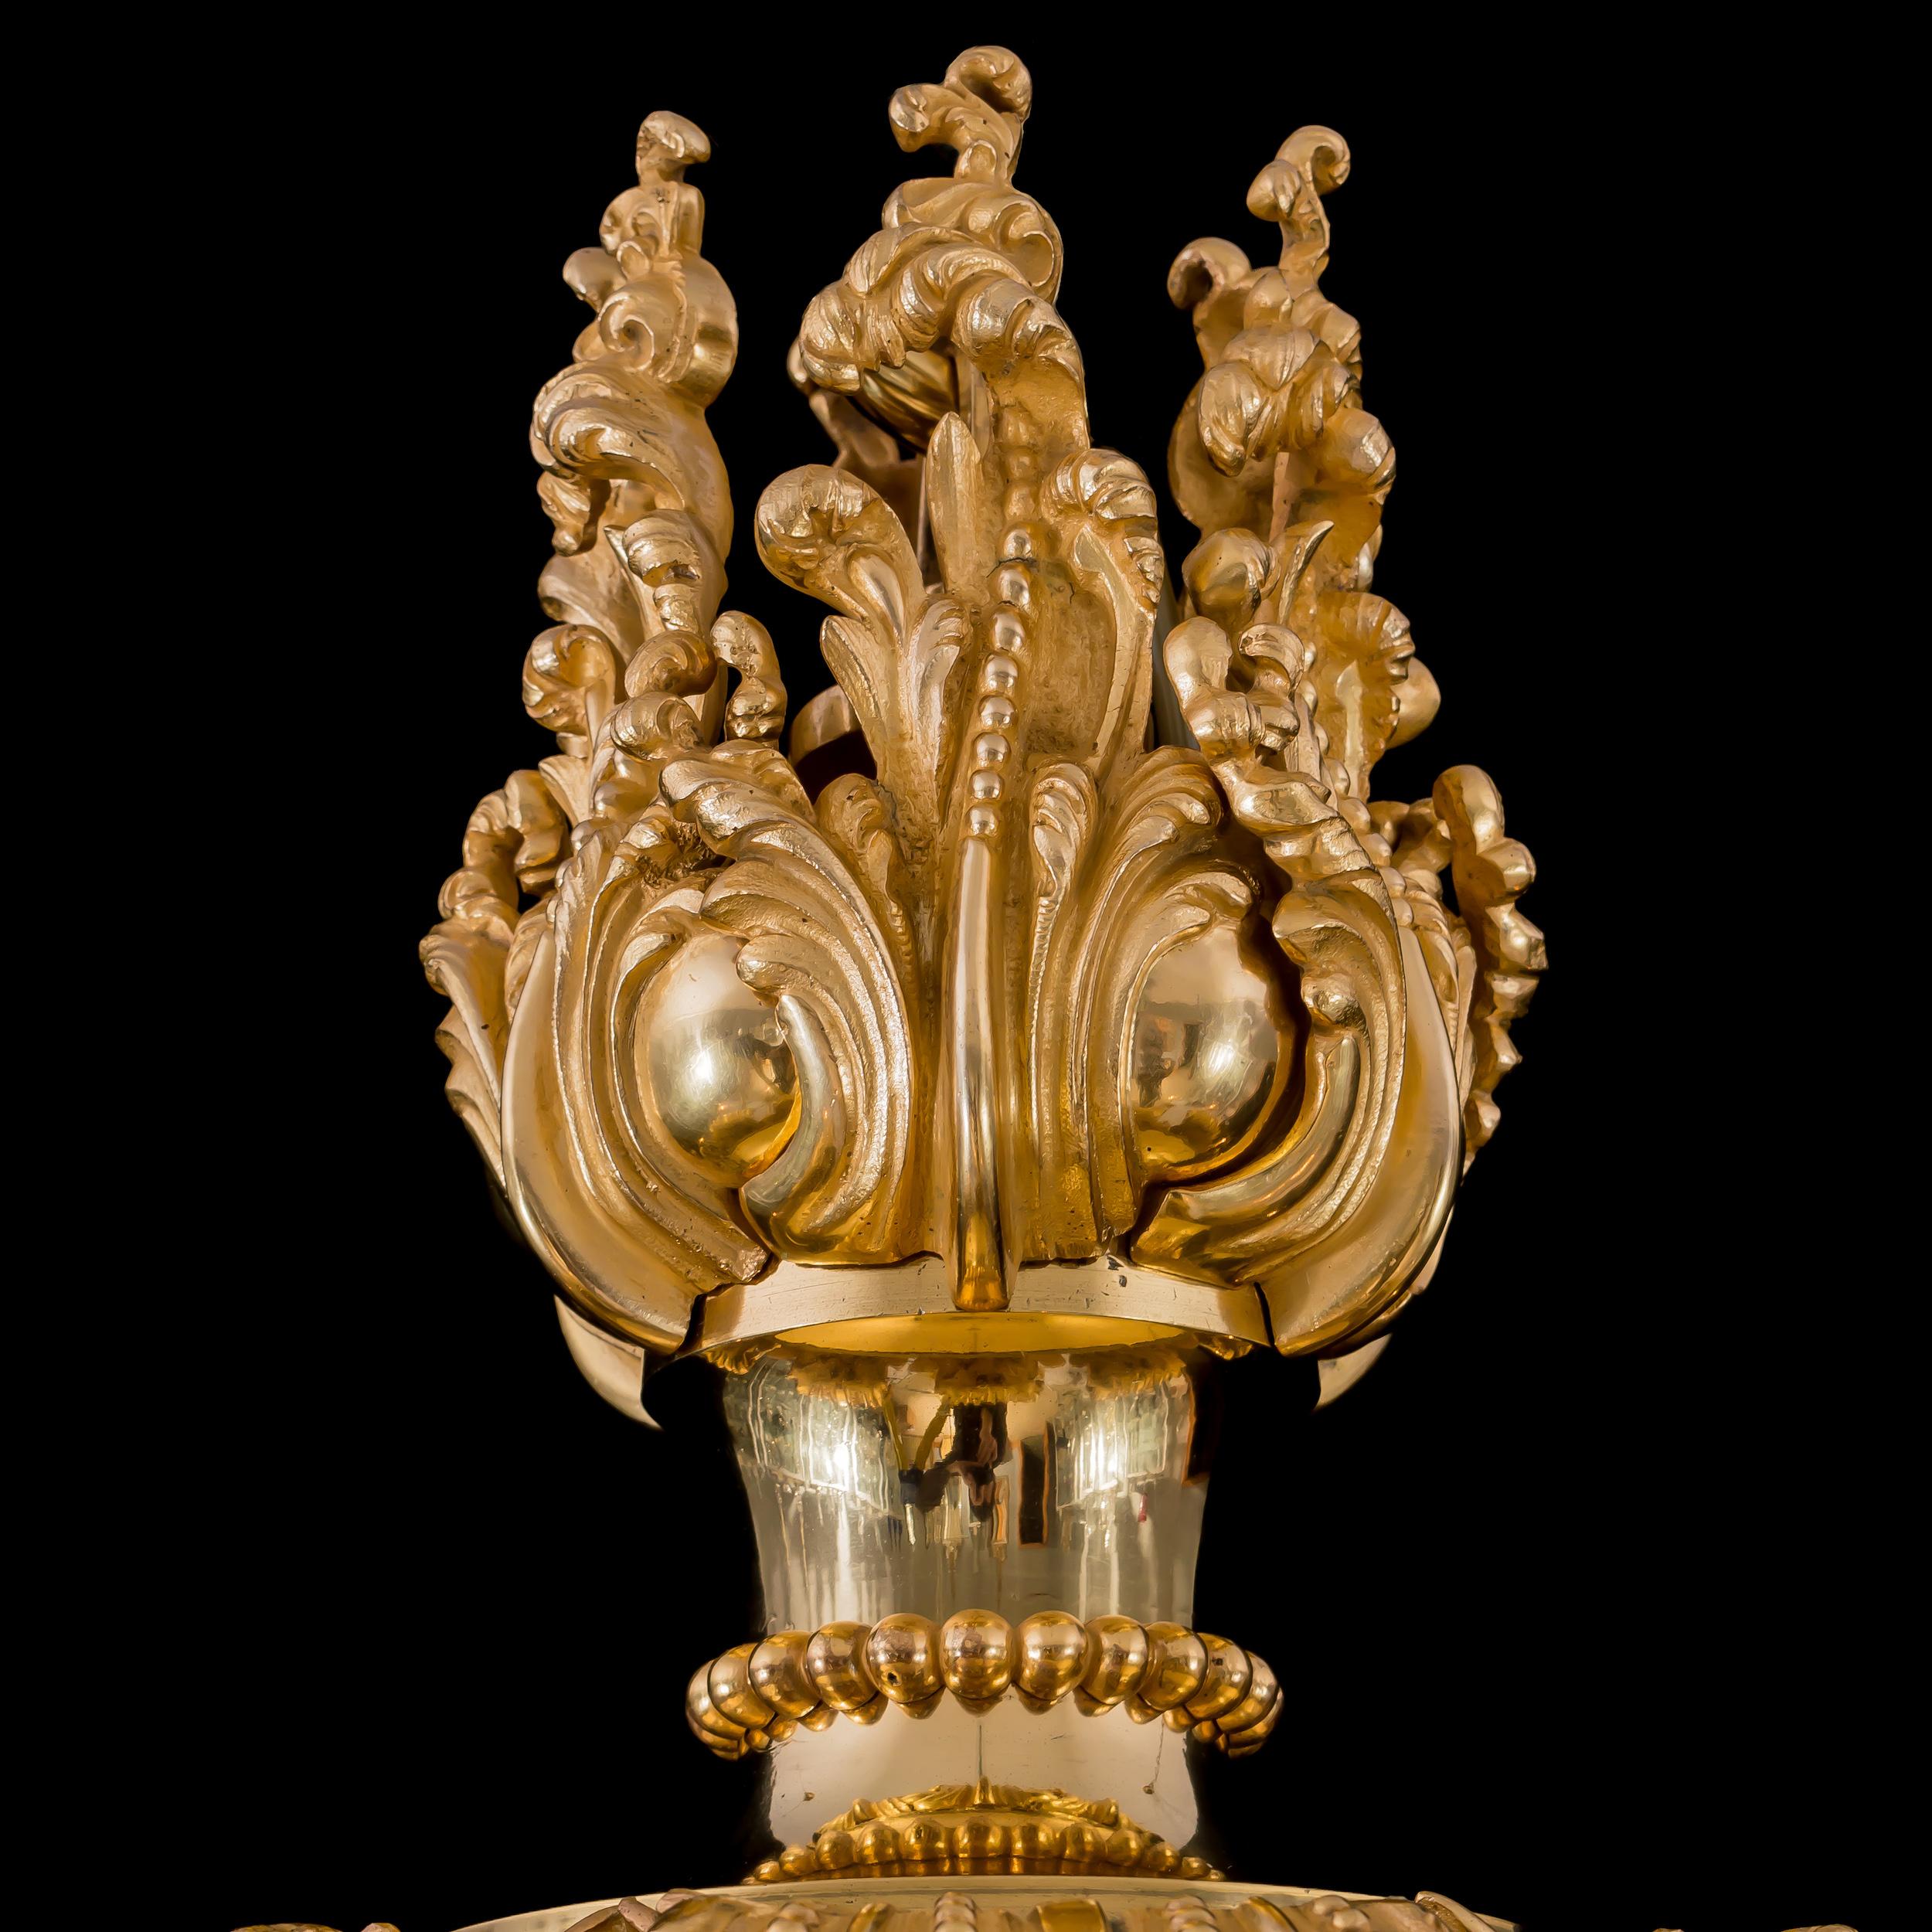 Magnificent George IV Period Ormolu Chandelier by Messenger & Phipson For Sale 3